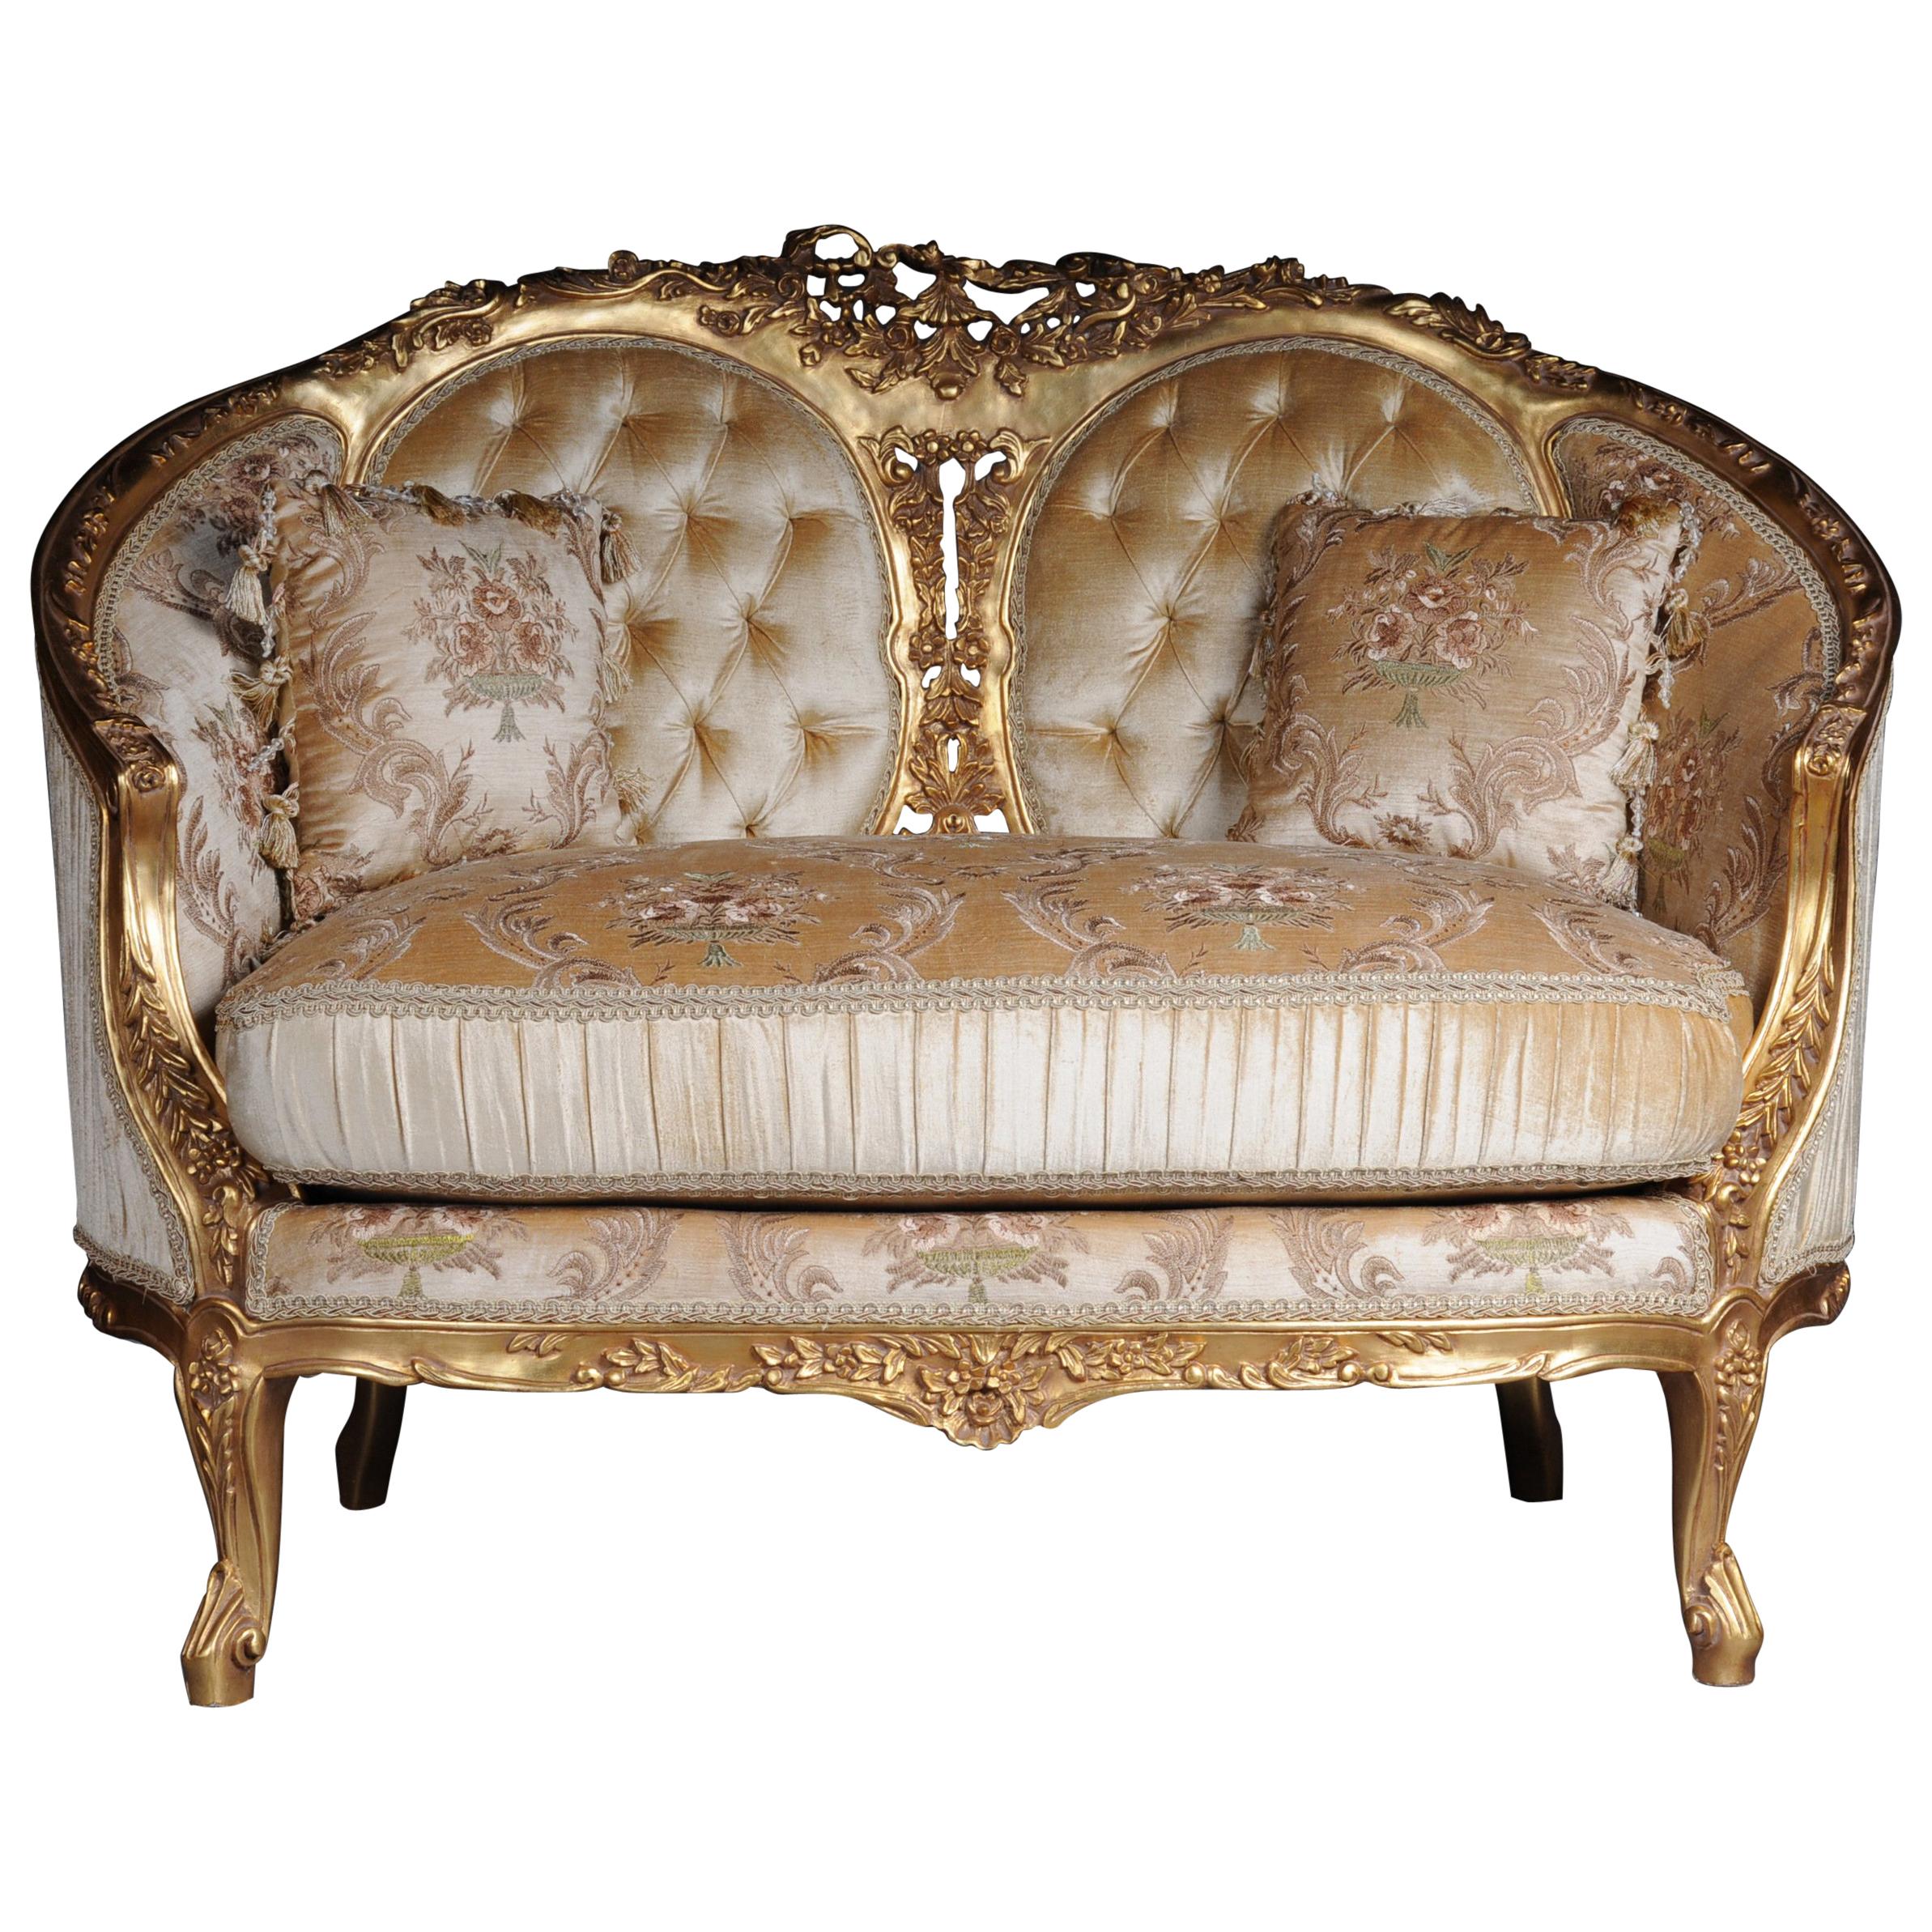 French Sofa Canape Couch In Rococo Or Louis Xv Style